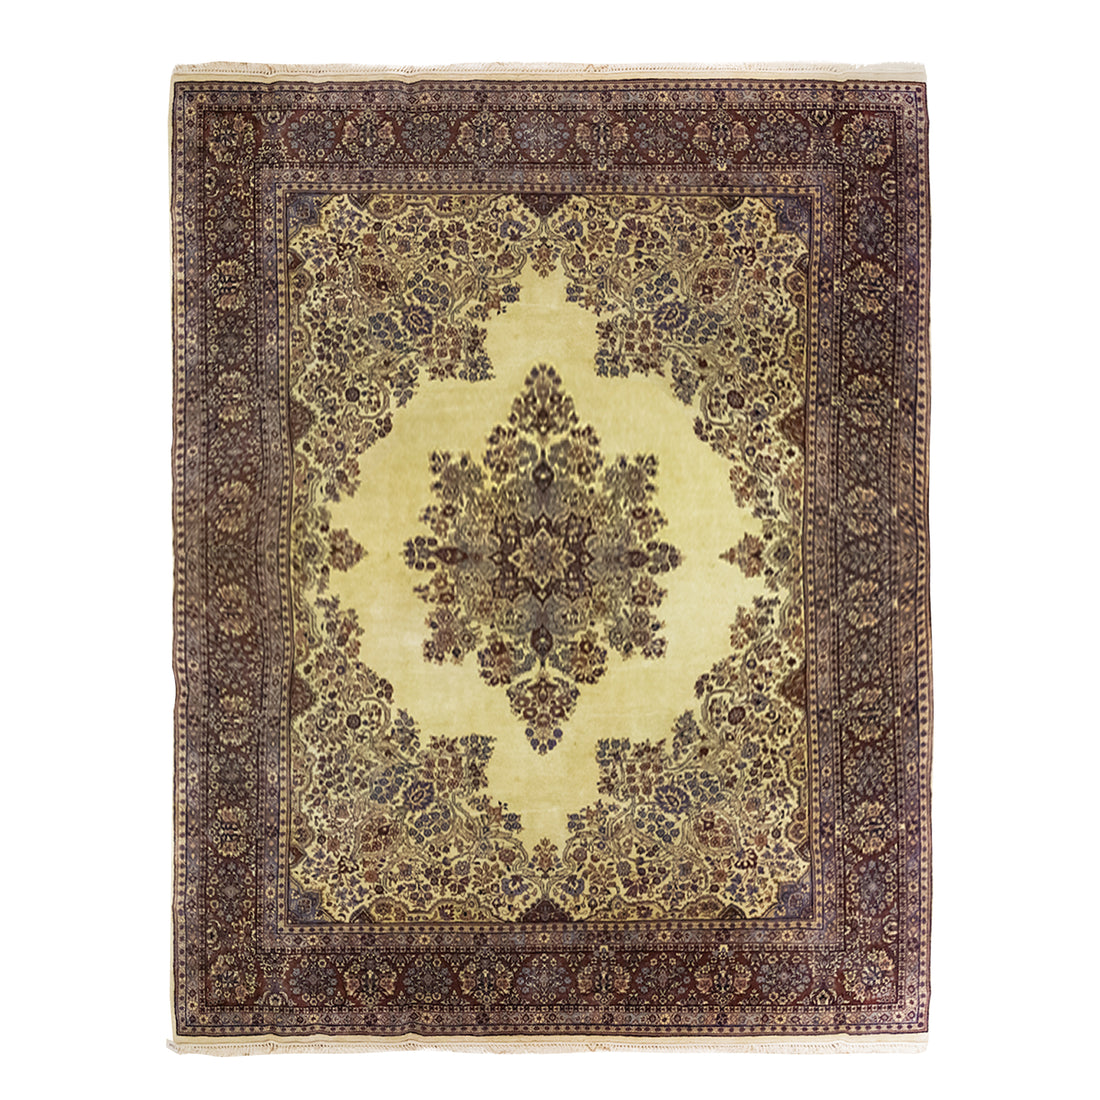 Hand-Knotted Wool Rug 14'2" x 10'6"